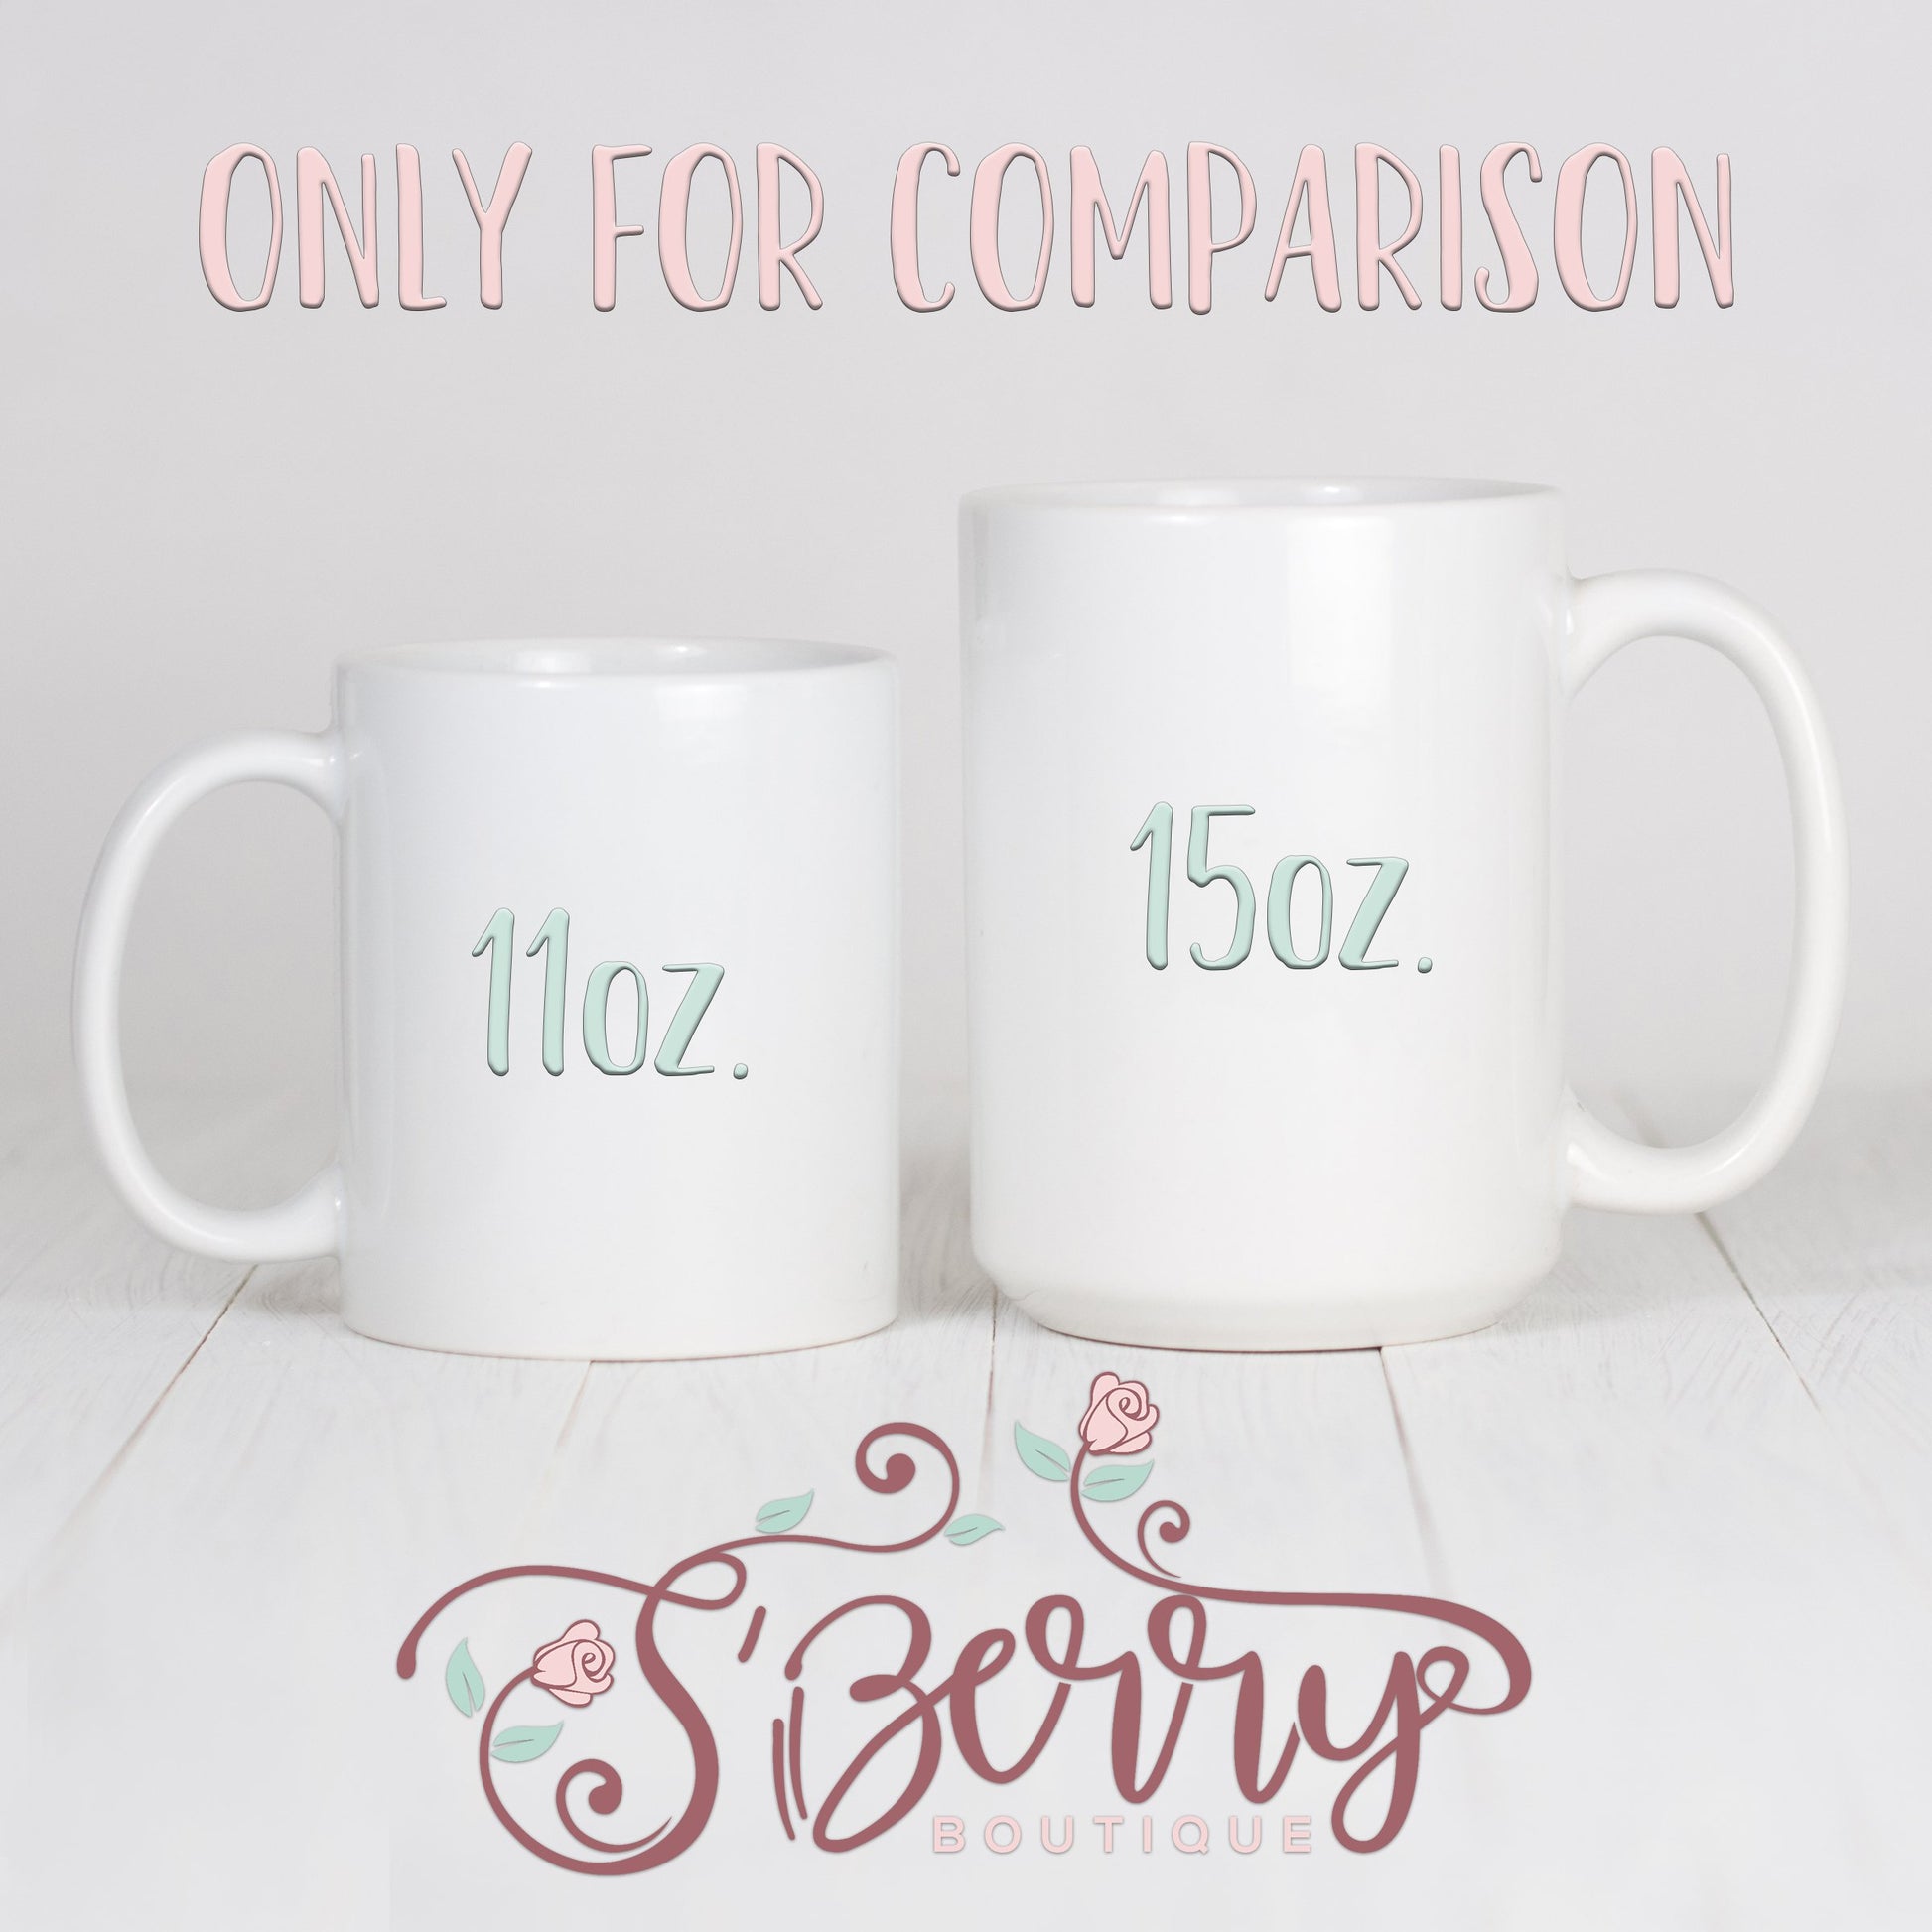 Personalized Bridesmaid with Date Coffee Mug - M0535 | S'Berry Boutique